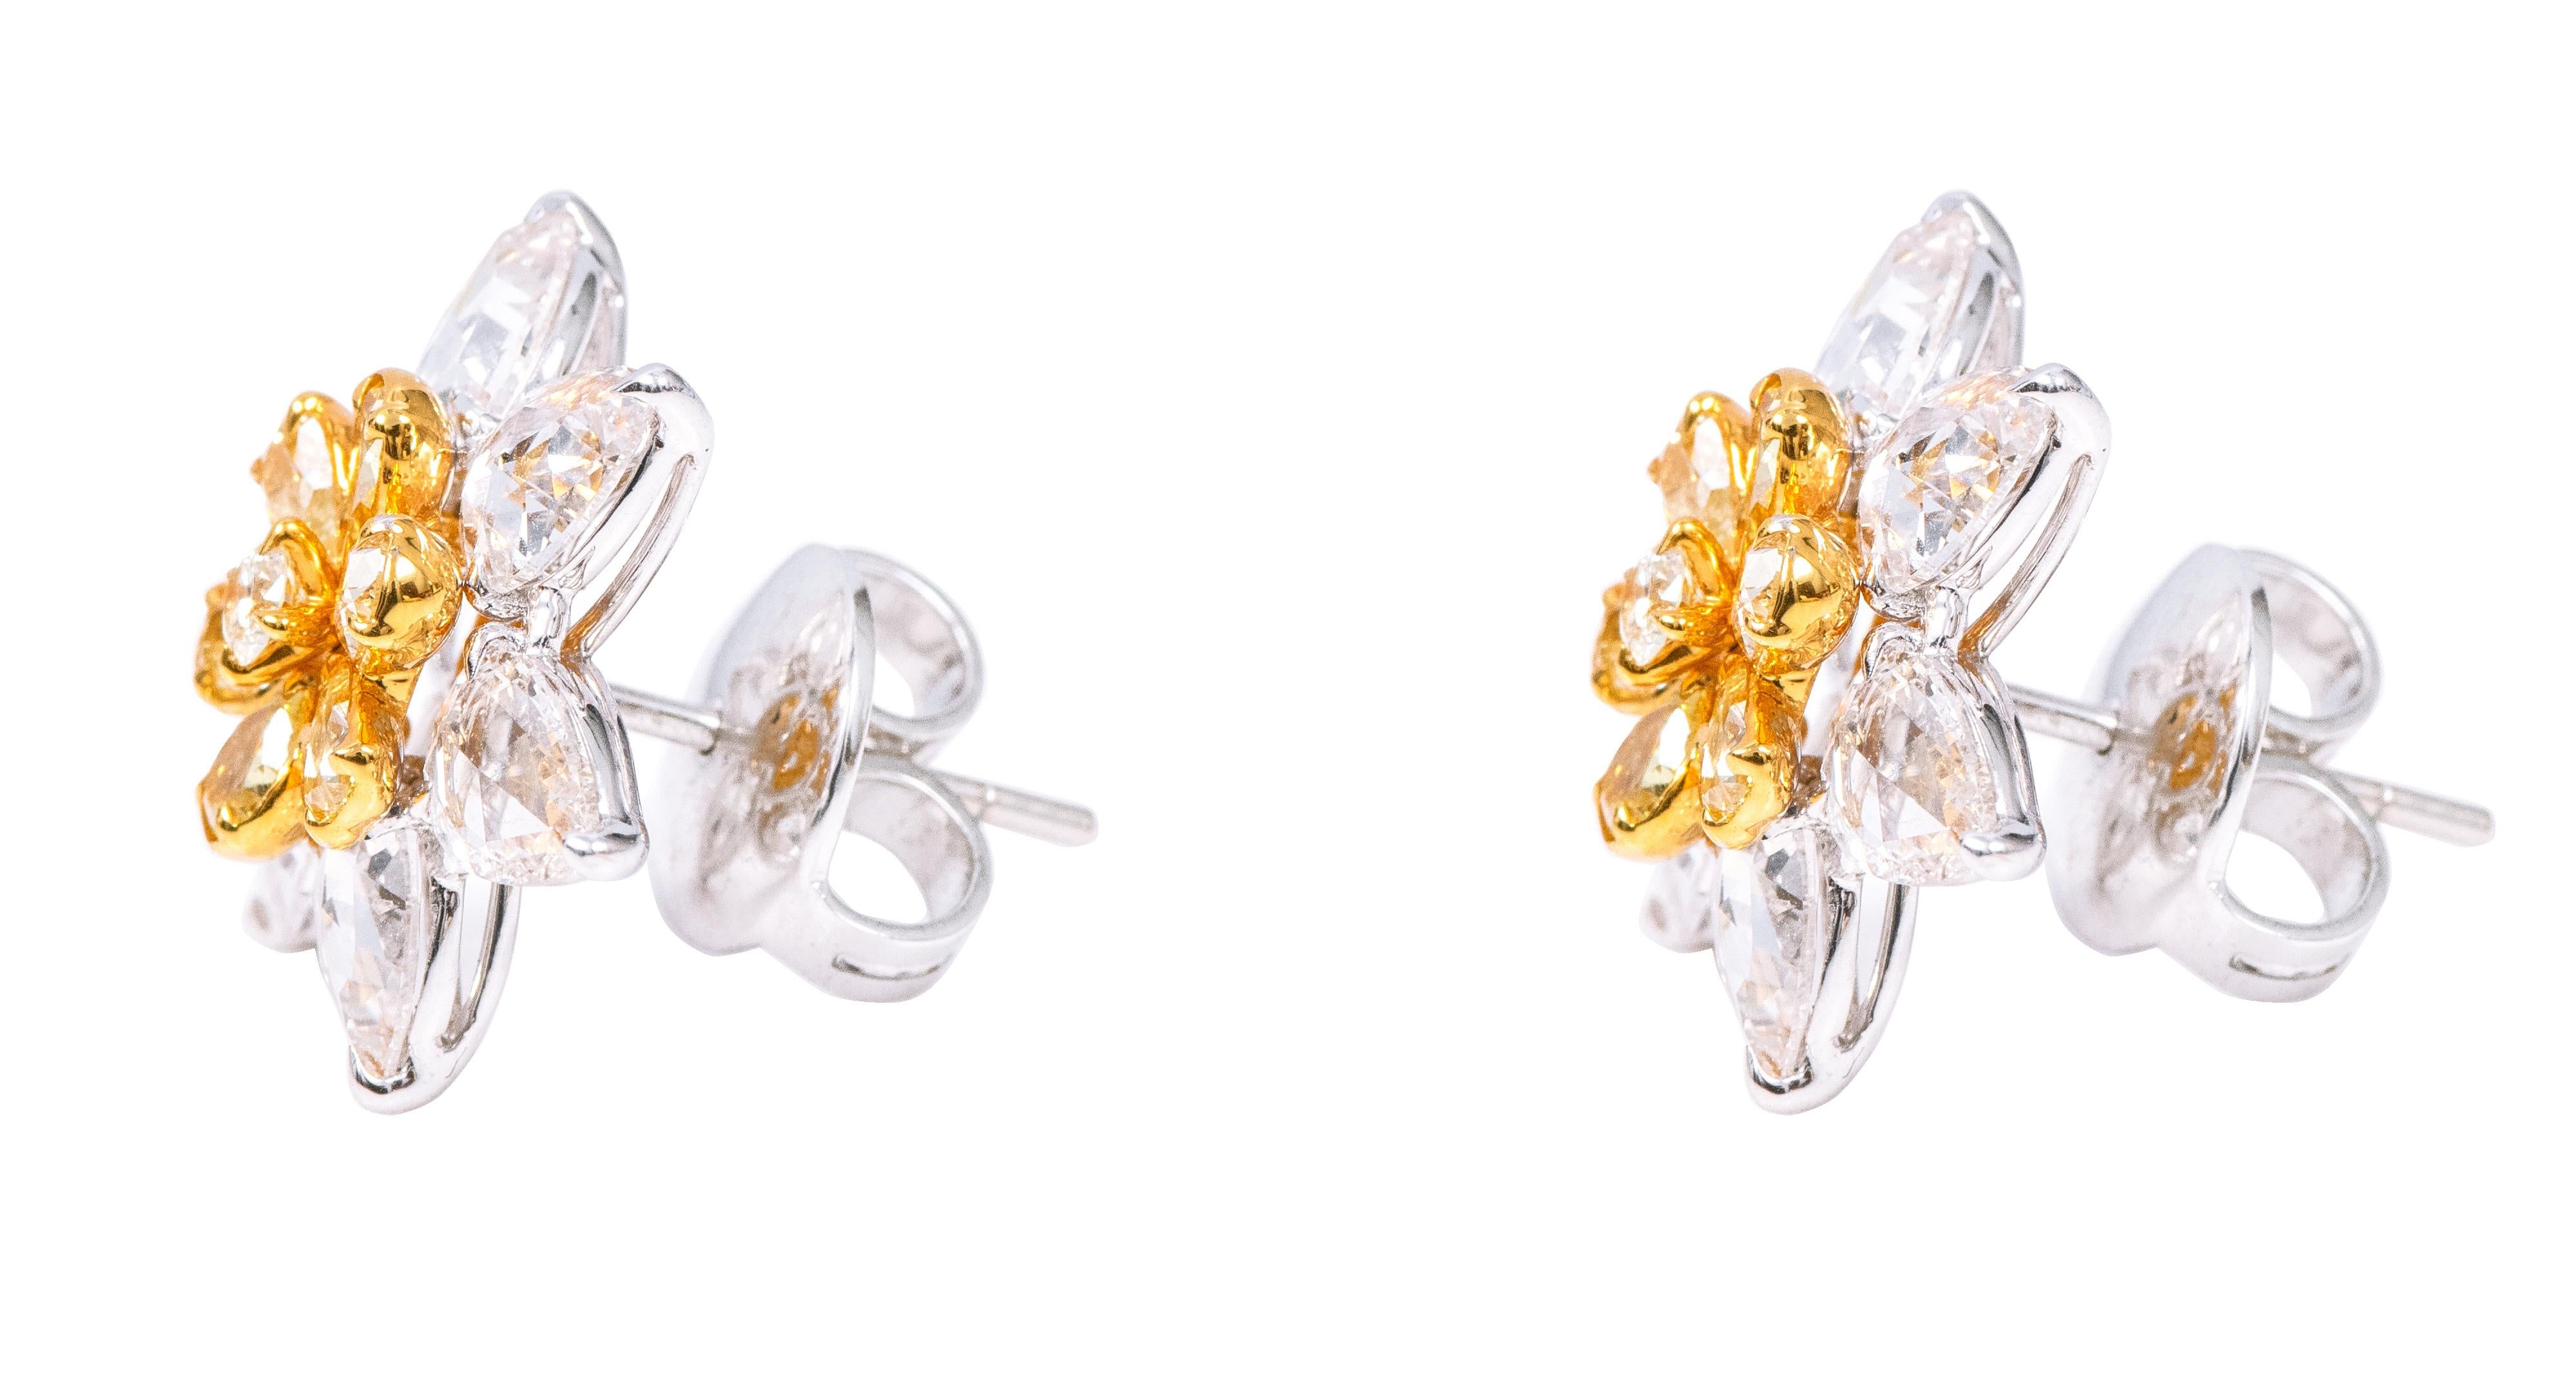 18 Karat Gold 6.12 Carat Yellow Diamond and White Diamond Flower Stud Earrings

Illuminate your elegance with our Yellow Diamond and White Diamond Modulation Flower Stud Earrings—a captivating pair that seamlessly blends the allure of yellow